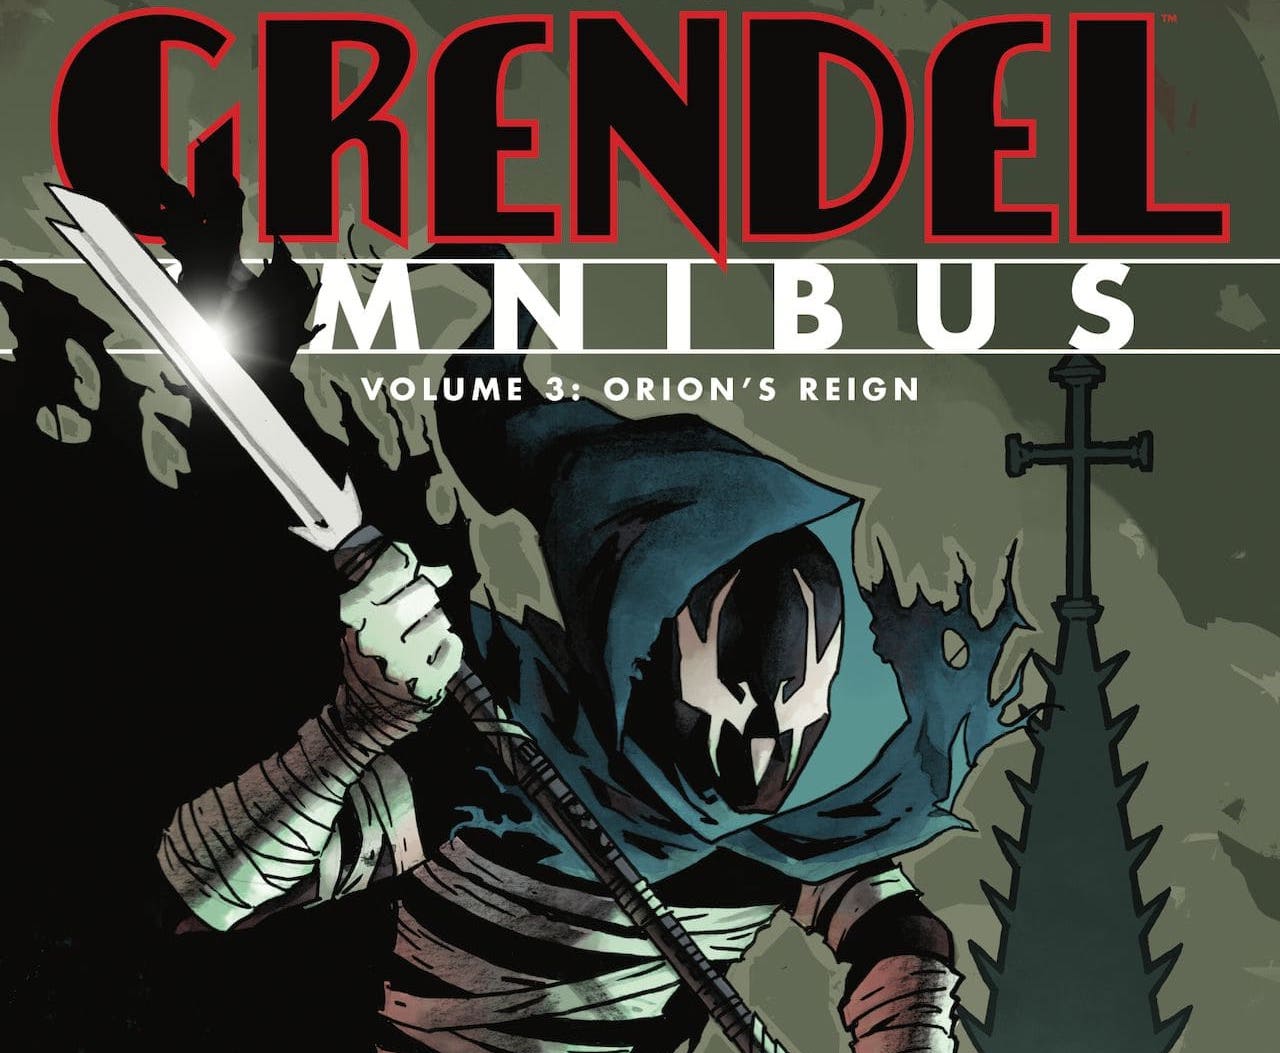 Get a look at Grendel omnibus vol. 2 and vol. 3 covers and collection details